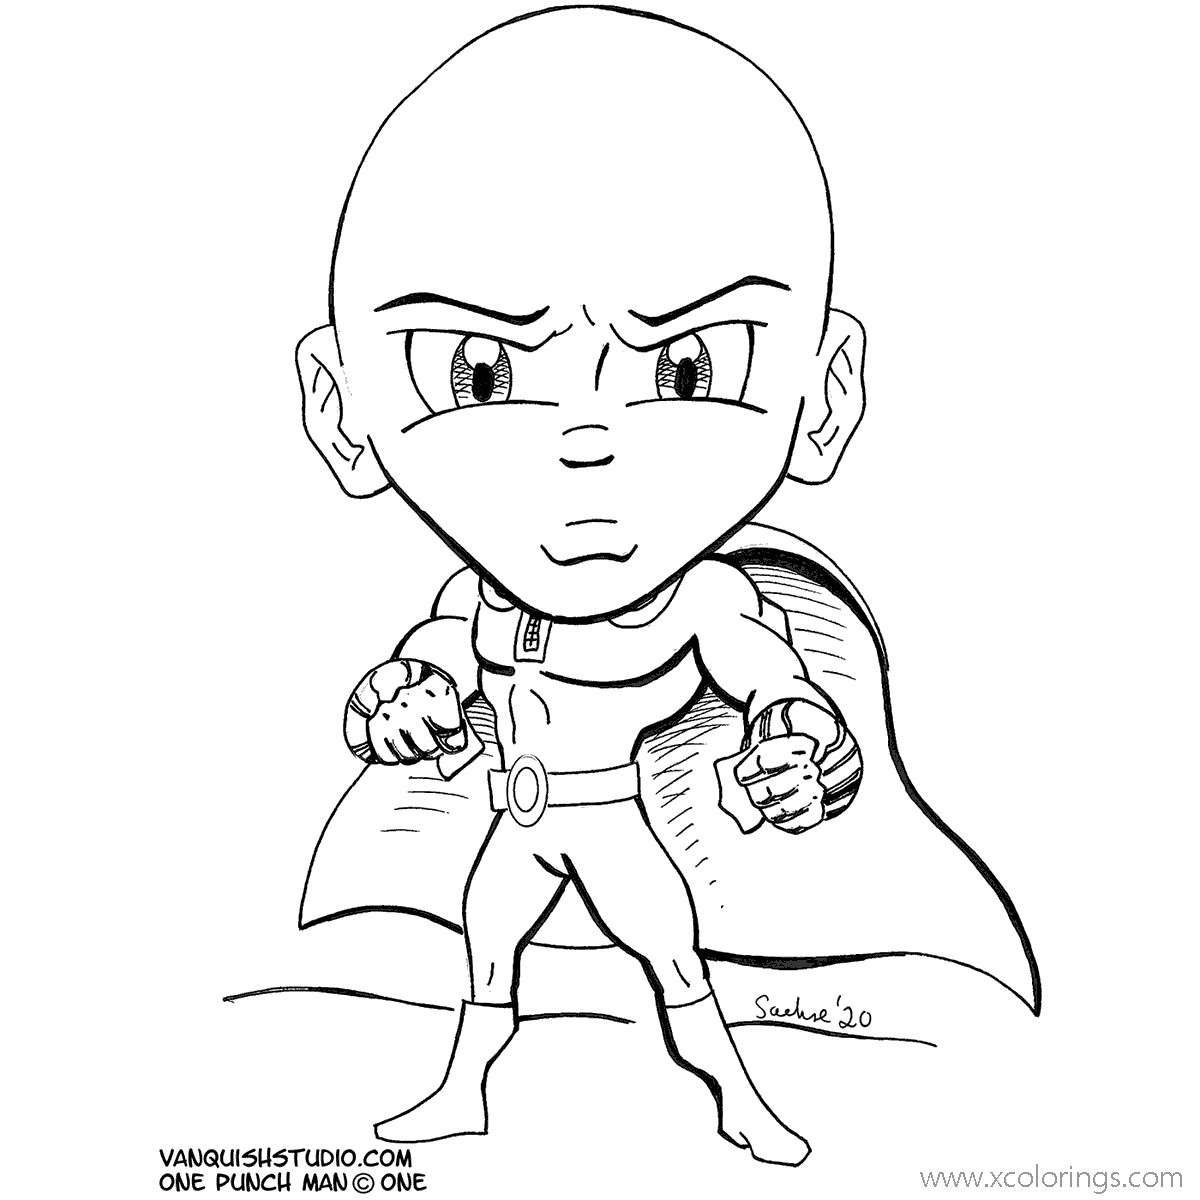 Free One Punch Man Coloring Pages Funko Pop Saitama printable